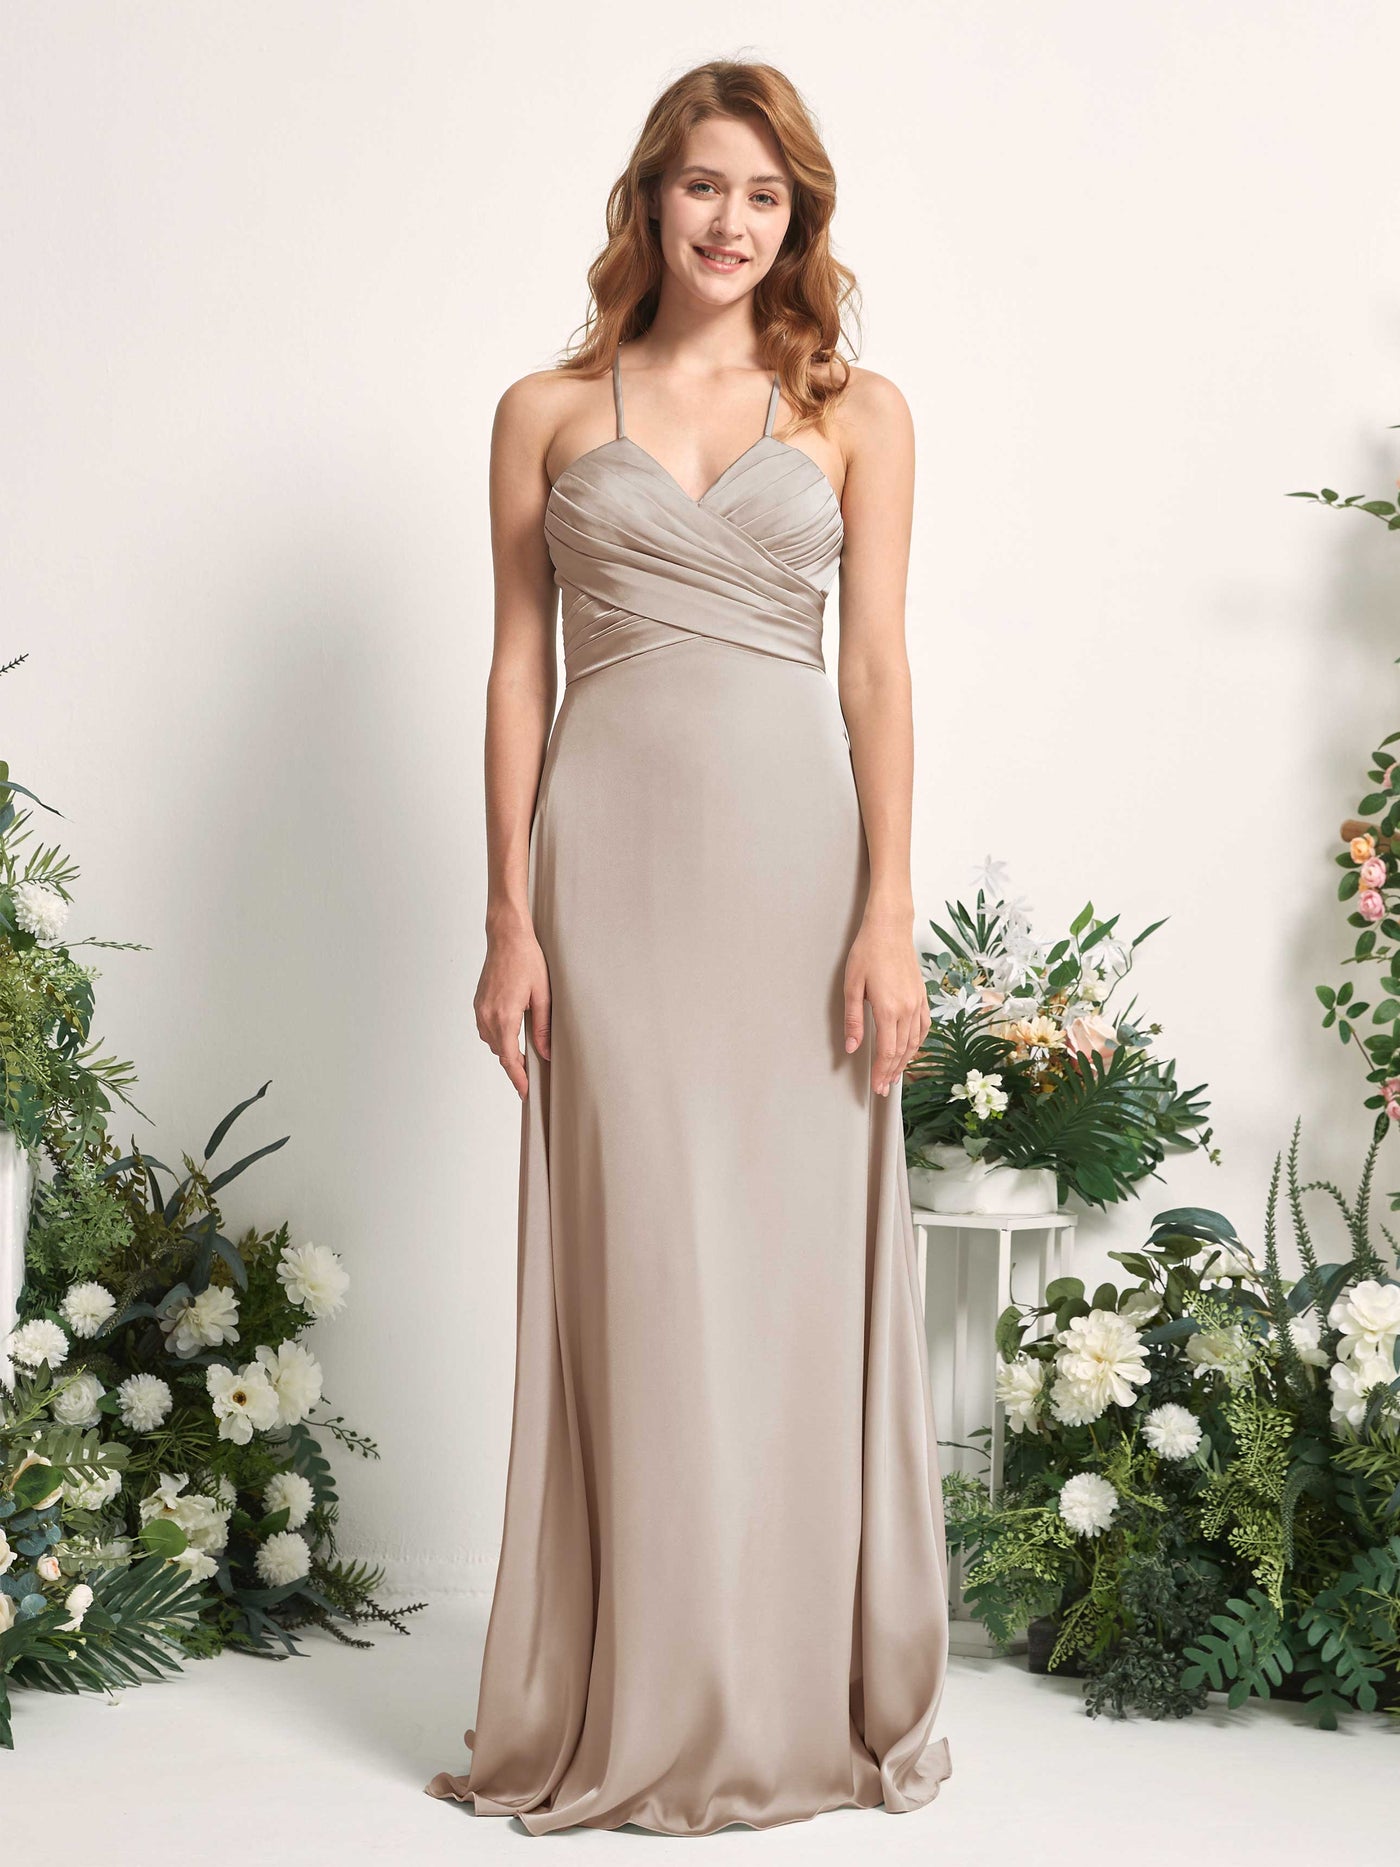 Taupe Bridesmaid Dresses Bridesmaid Dress A-line Satin Spaghetti-straps Full Length Sleeveless Wedding Party Dress (80225702)#color_taupe